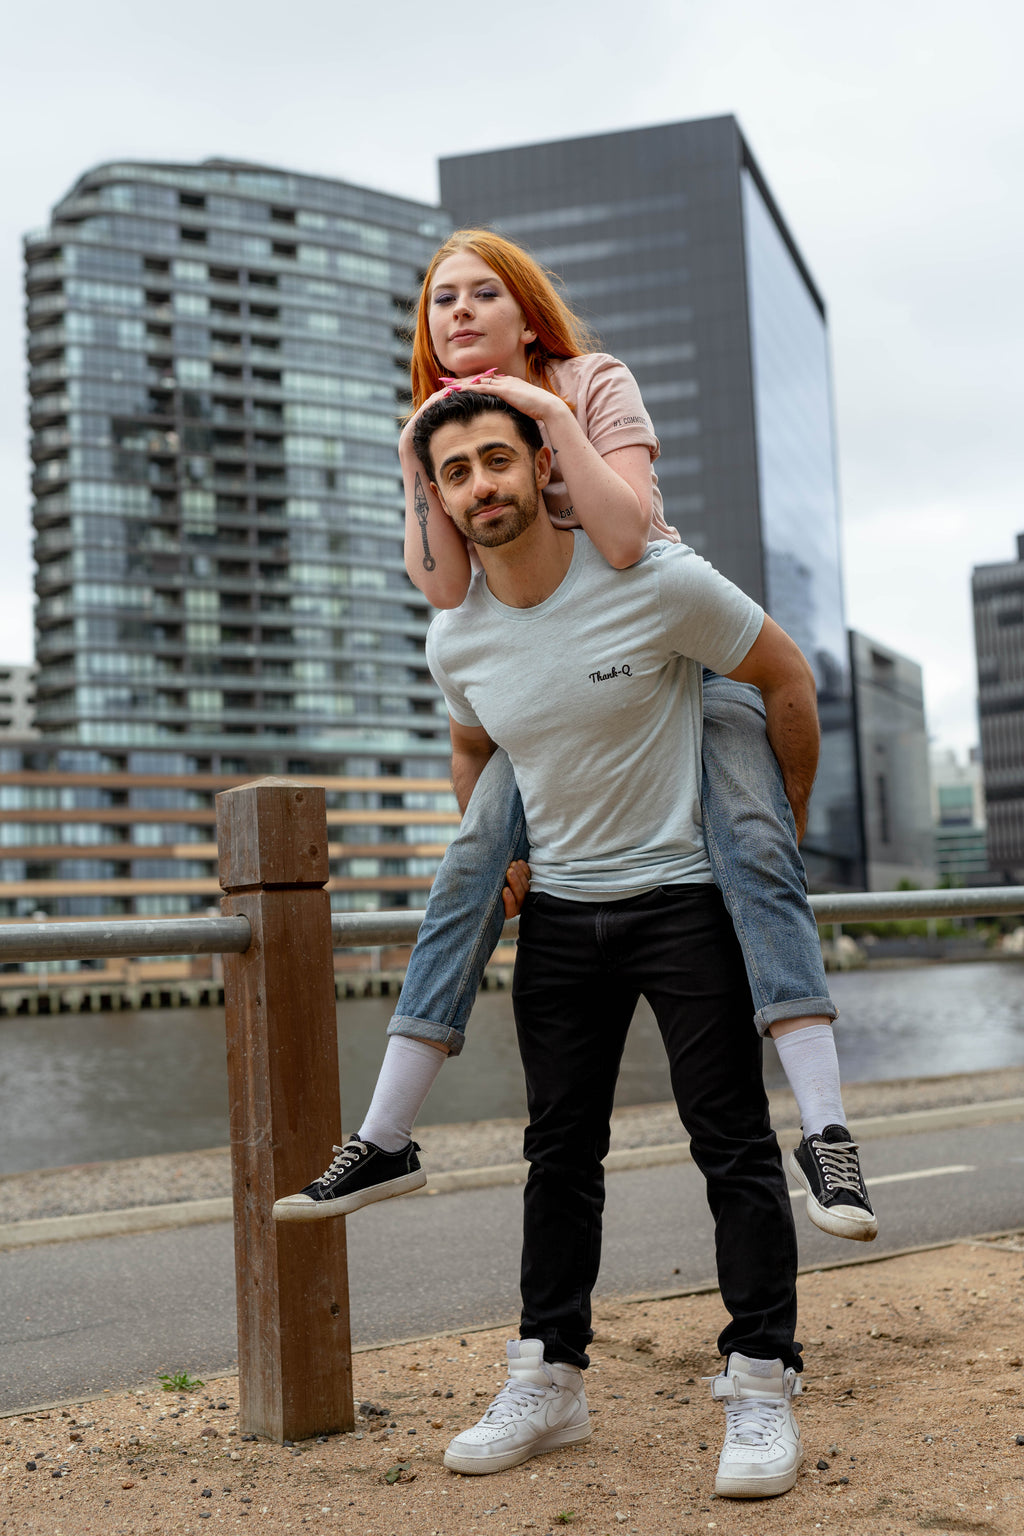 darren and madi piggy back in blue thank-q embroidered tee, banter tee